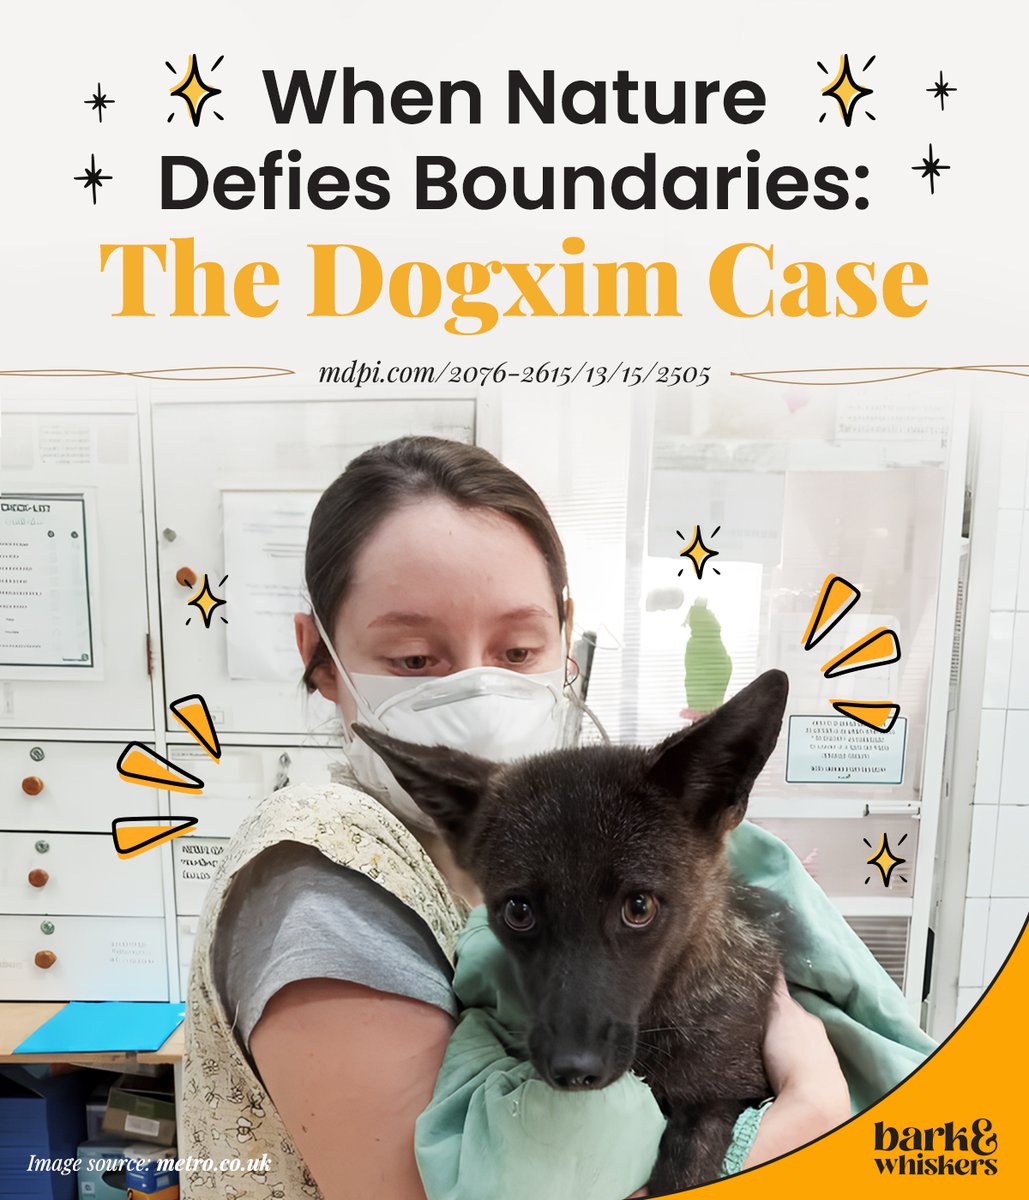 Meet Dogxim!✨ The World's First Confirmed Dog-Fox Hybrid! 🐕🦊

Learn more about her story in today's free article: bit.ly/49CXPd6

#Dogxim #Dog #Fox #HybridAnimal